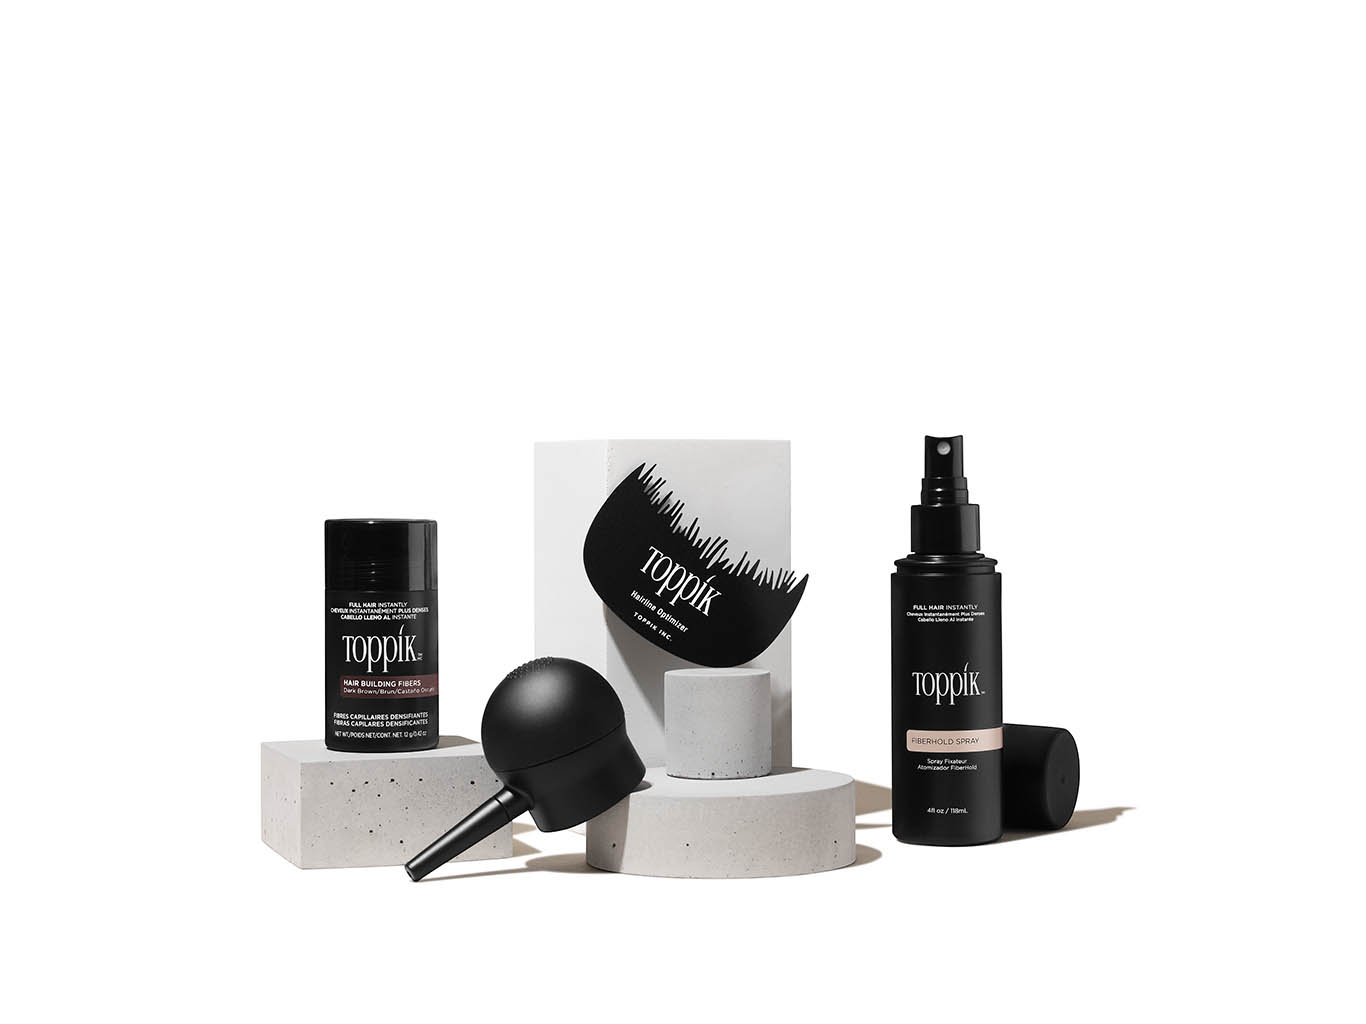 Packshot Factory - Haircare - Toppik hair care products